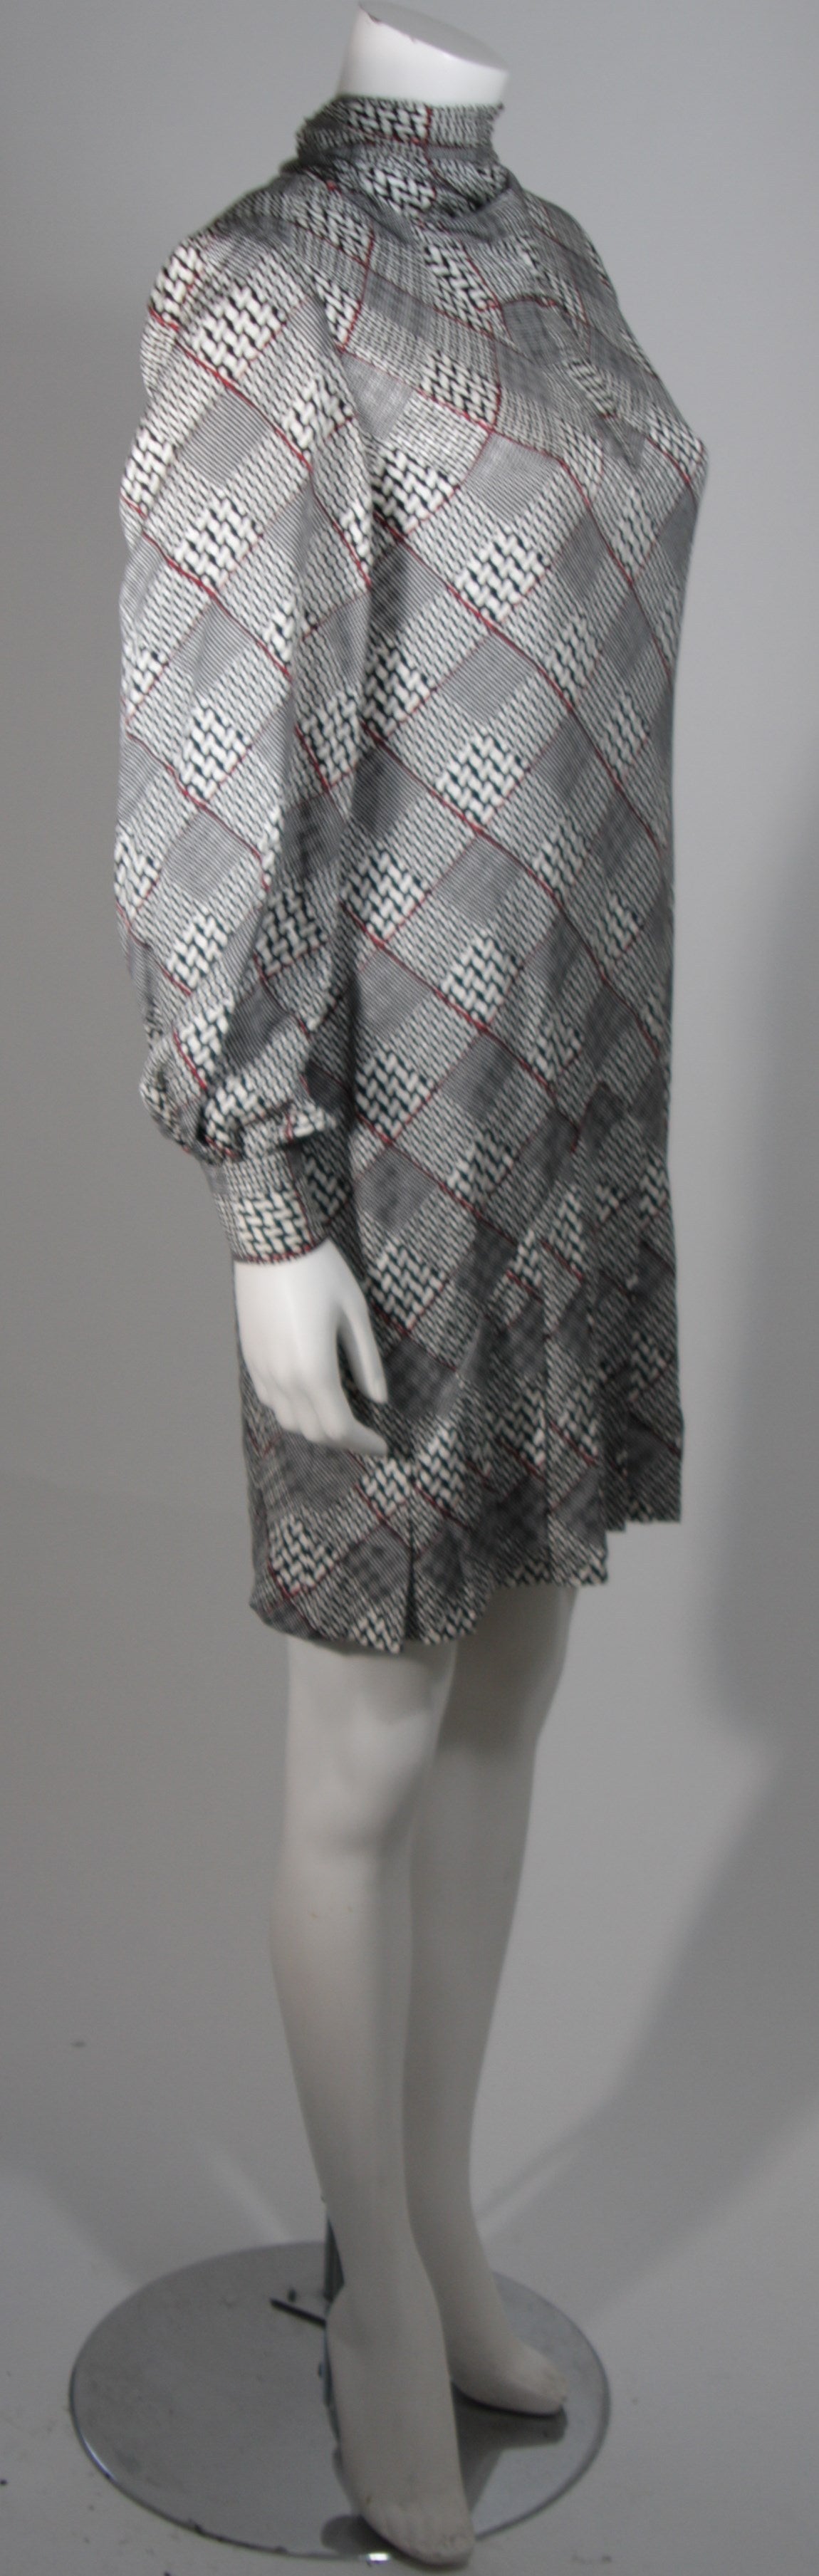 Galanos Couture Houndstooth Dress and Coat Ensemble Size 2 4 6 2